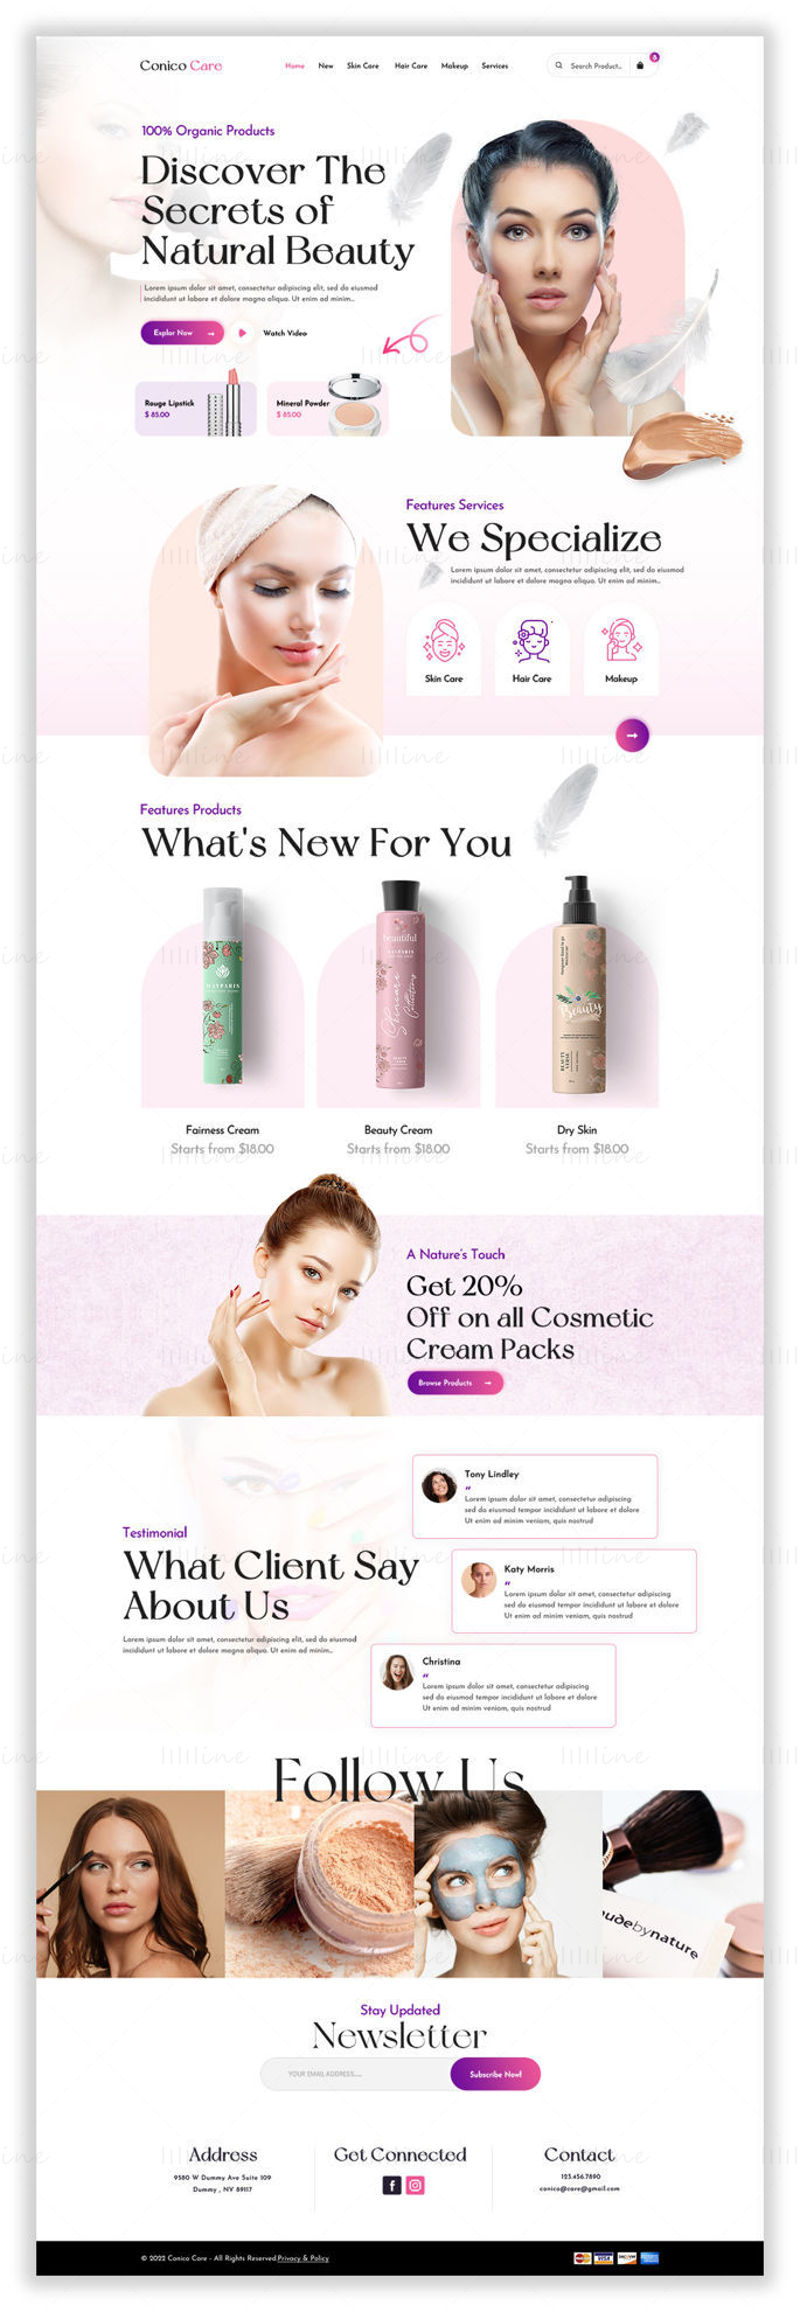 Page d'accueil Conico-Care Cosmetic & Skin Care - UI Adobe Photoshop